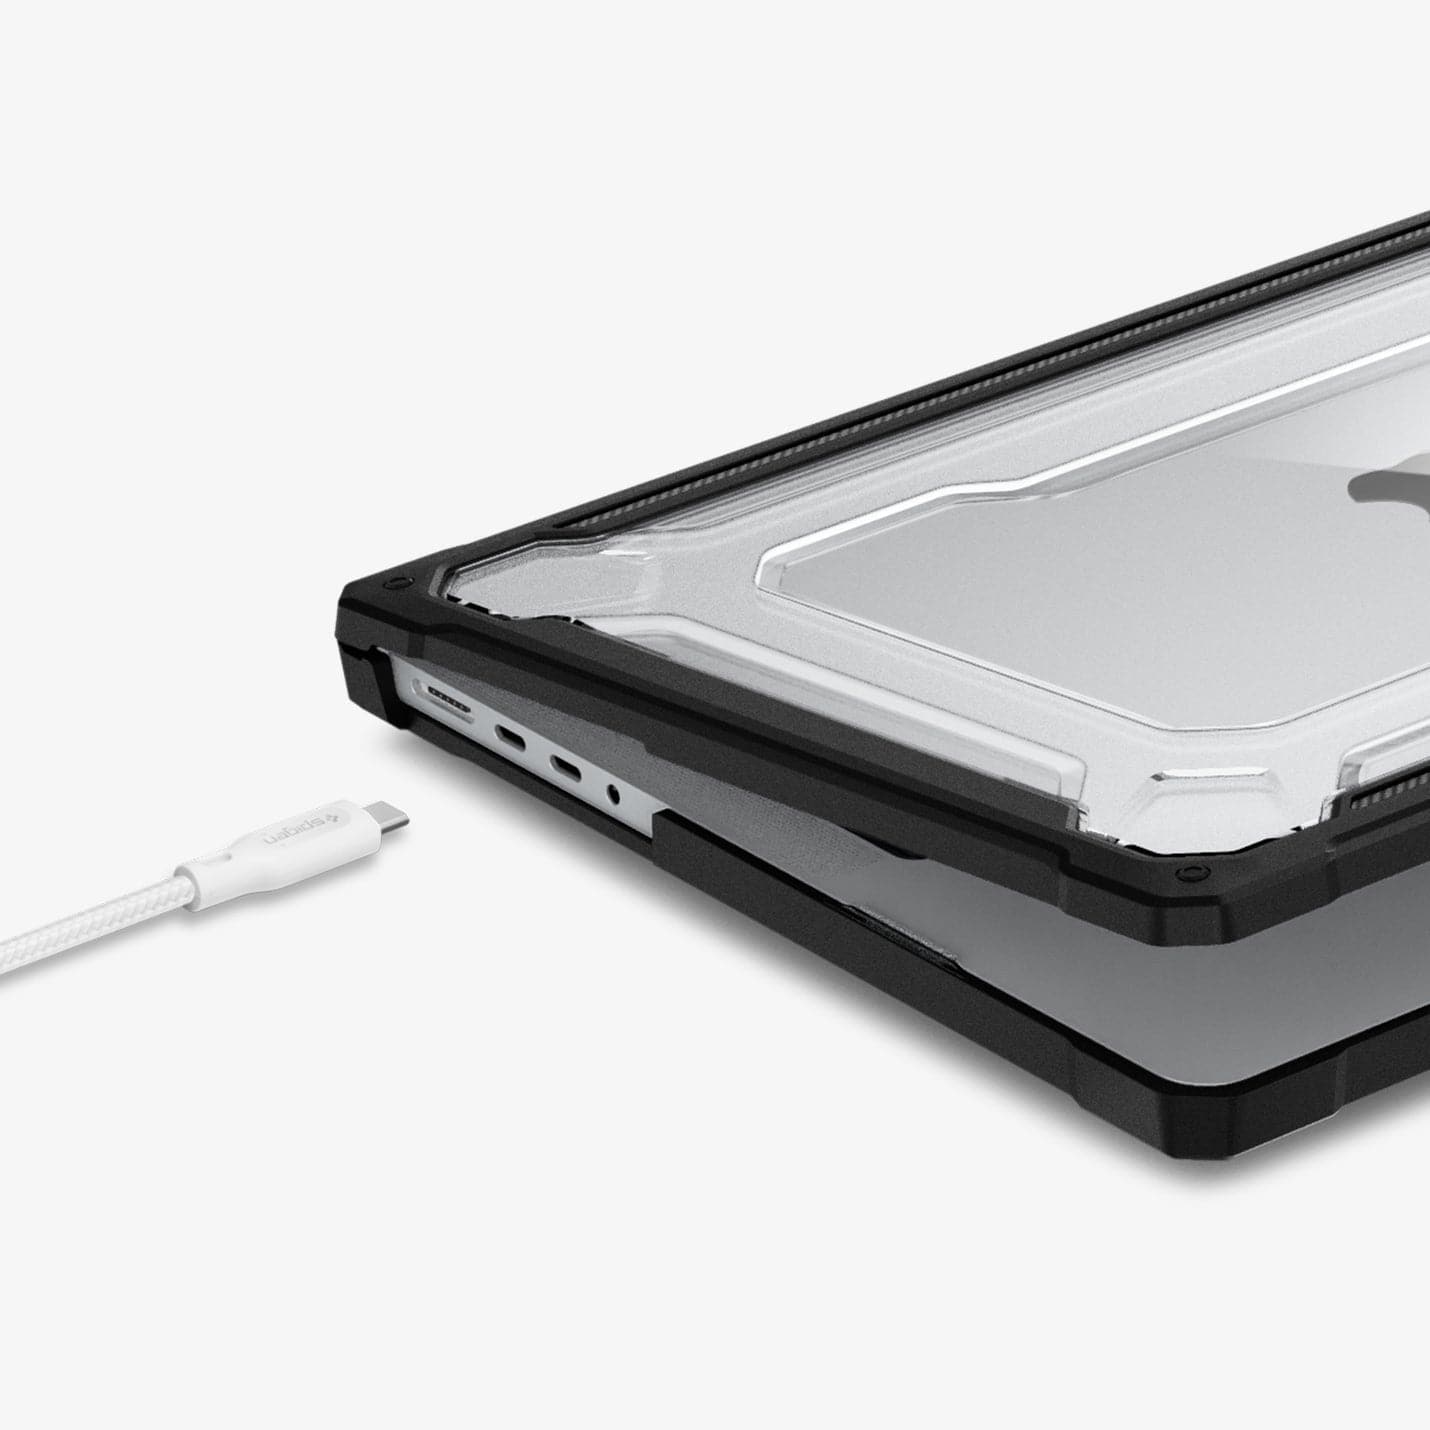 ACS04409 - MacBook Pro 14" Case Rugged Armor in matte black showing the front and side with laptop slightly open and charging cable next to slot